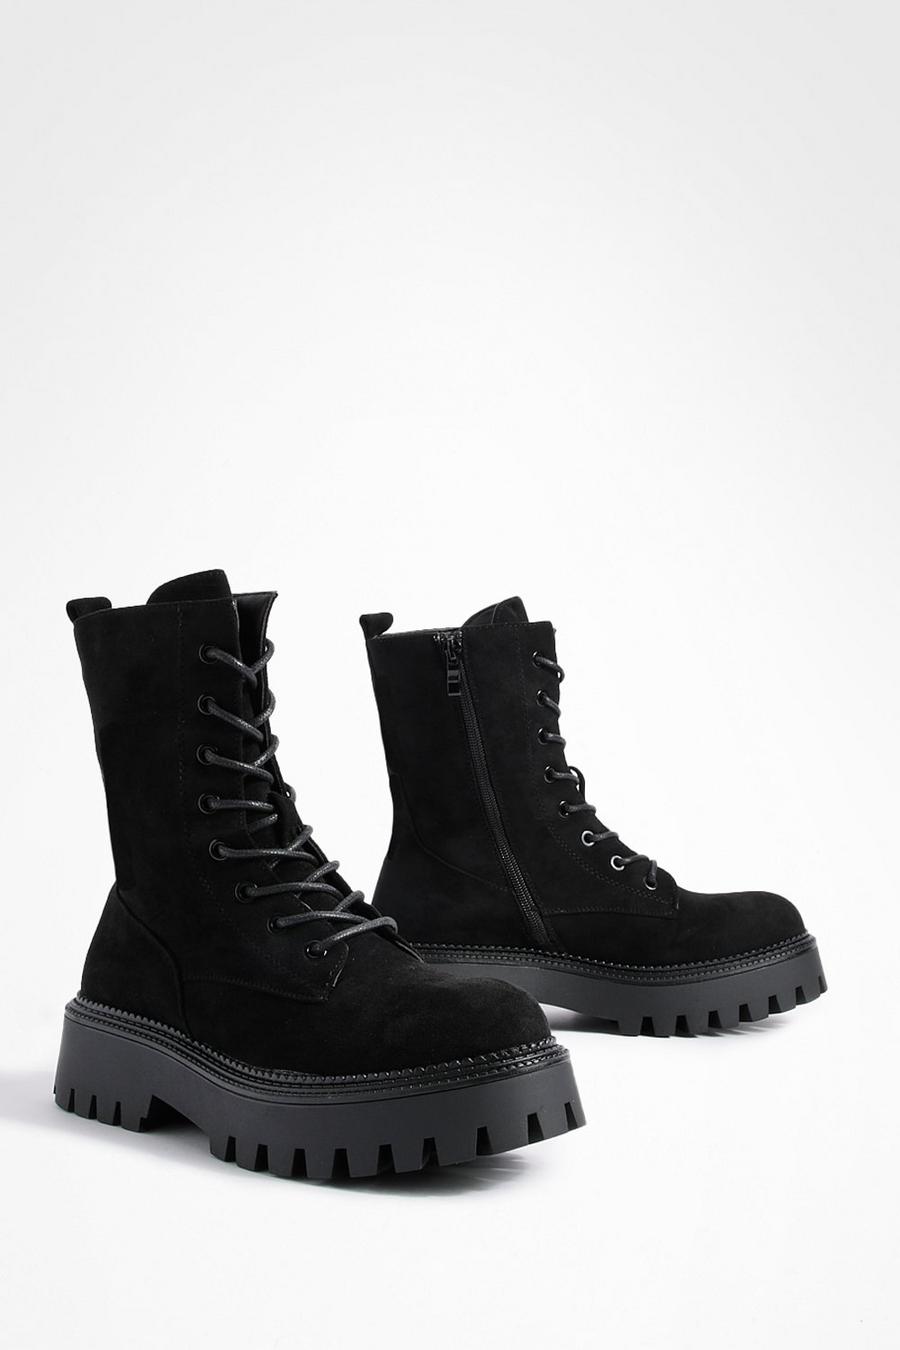 Black noir Super Chunky High Ankle Lace Up Boots